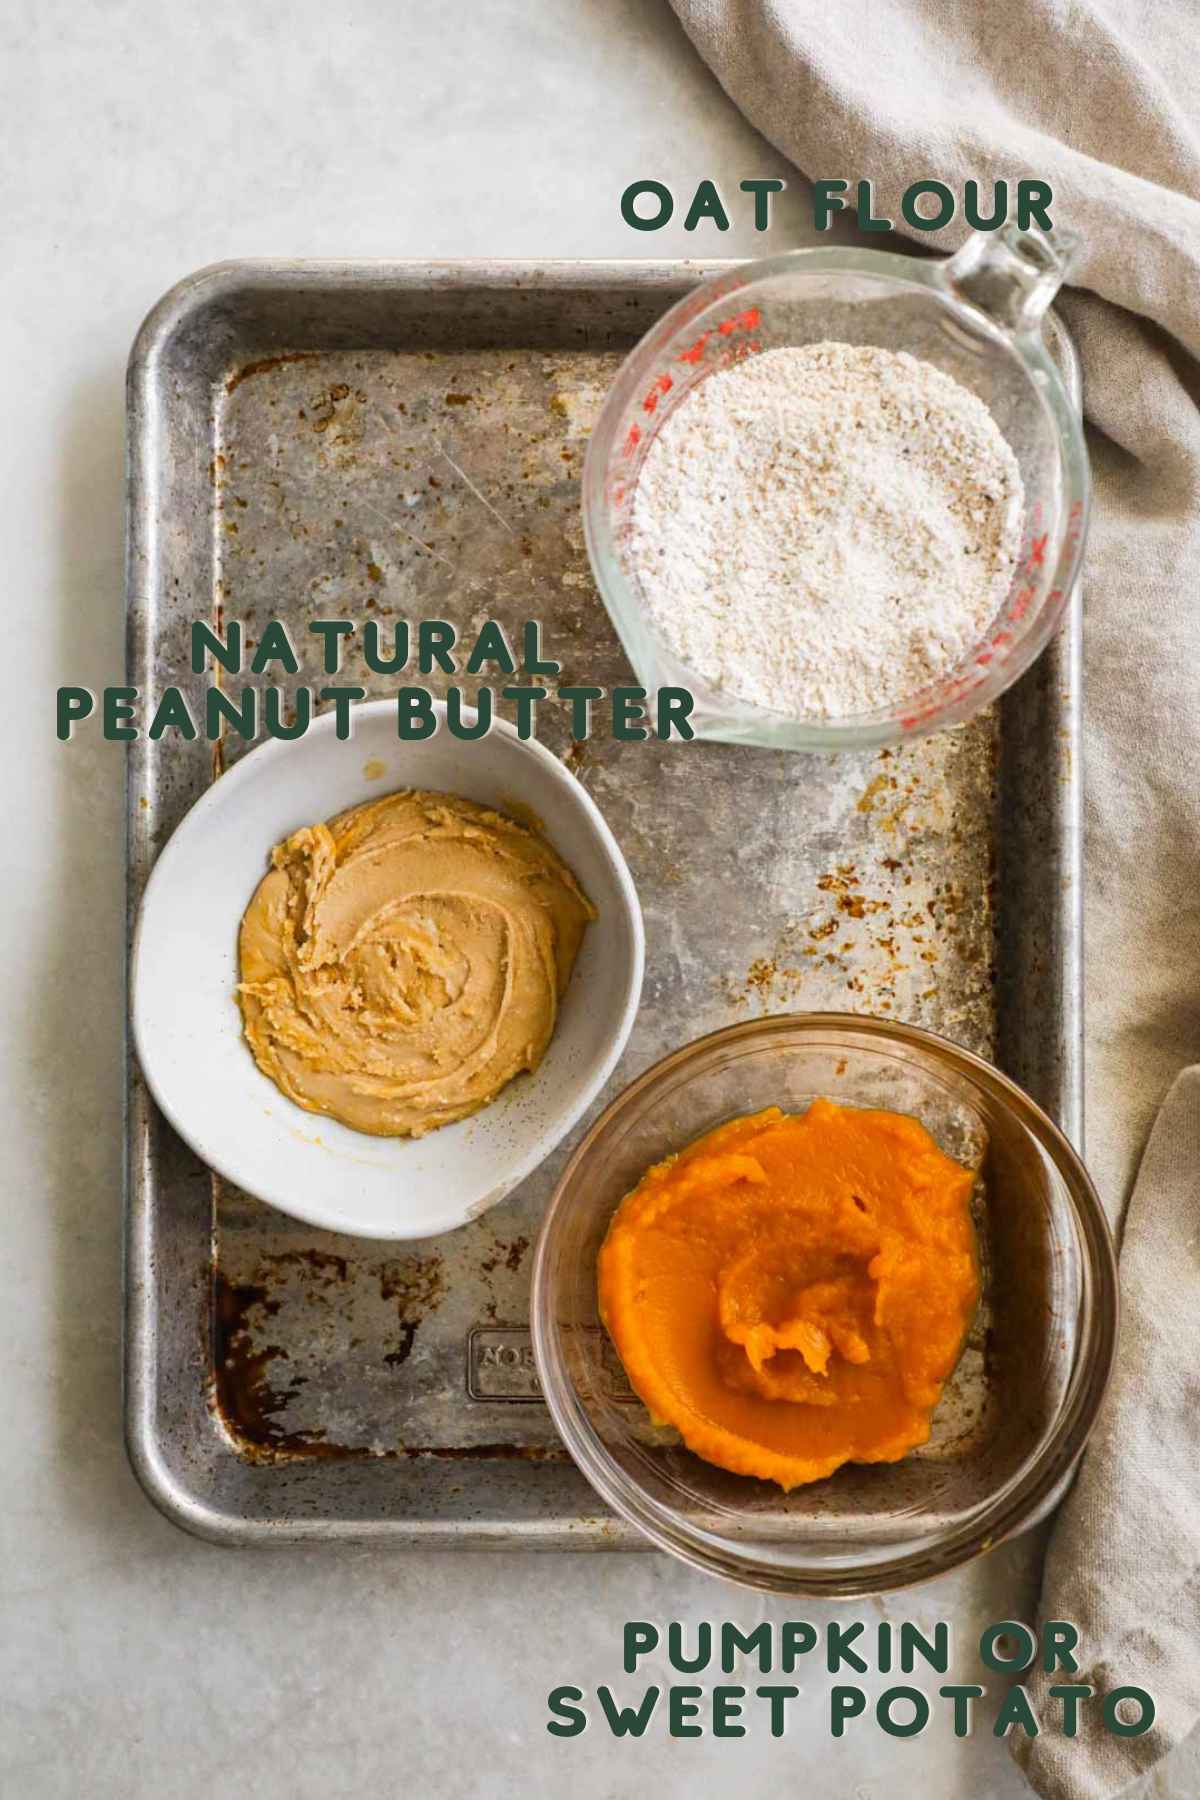 Ingredients for 3-ingredient dog biscuits, oat flour, natural peanut butter, and pumpkin or sweet potato.